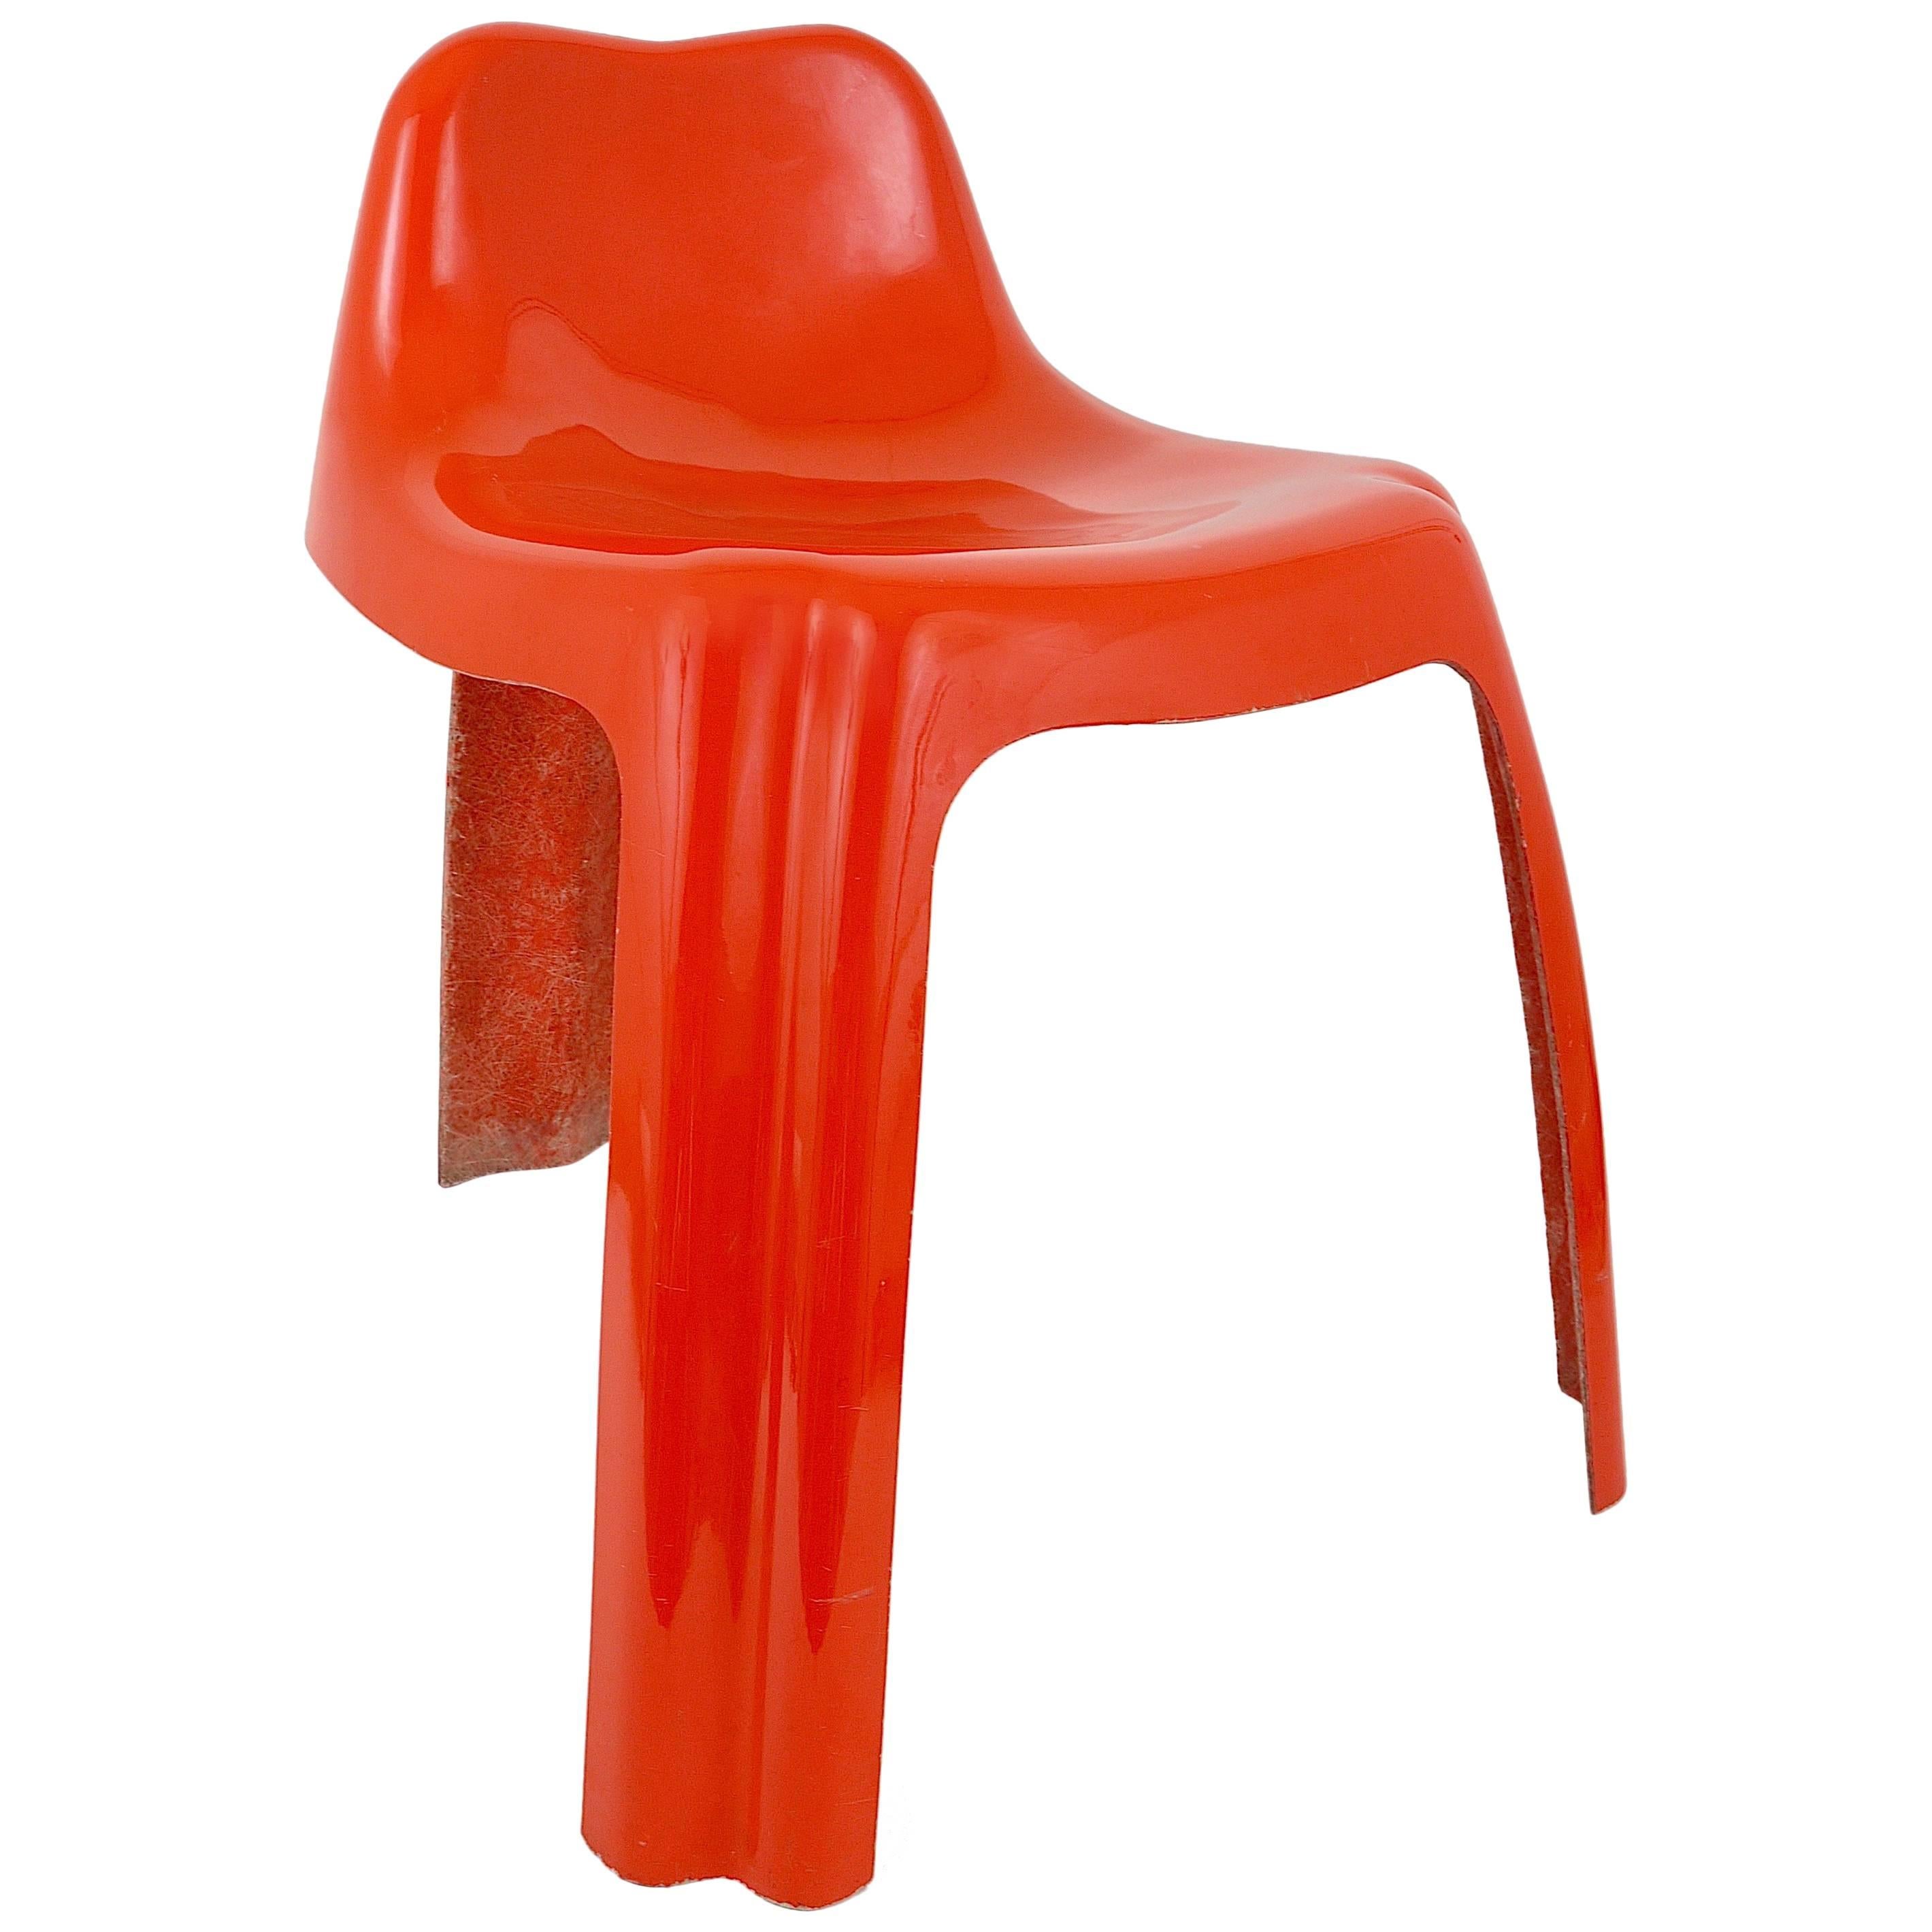 Orange Fiberglass Chair Ginger by Patrick Gingembre, Paulus, France, 1970s For Sale